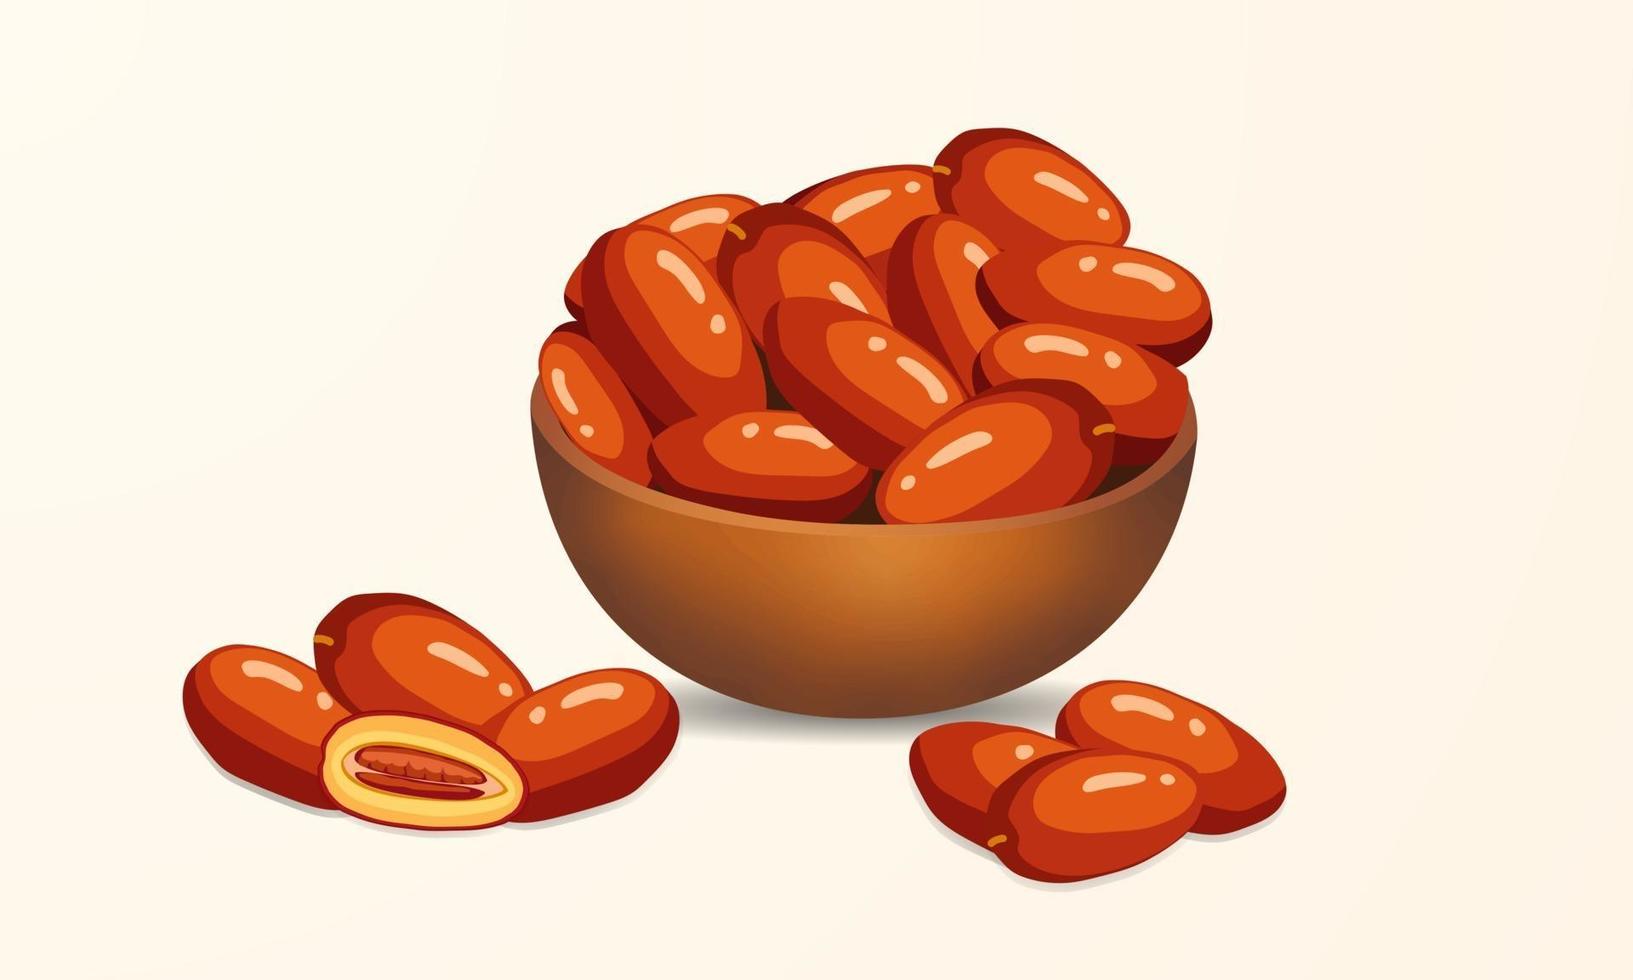 A crowded of dates in a wooden bowl dates illustration vector